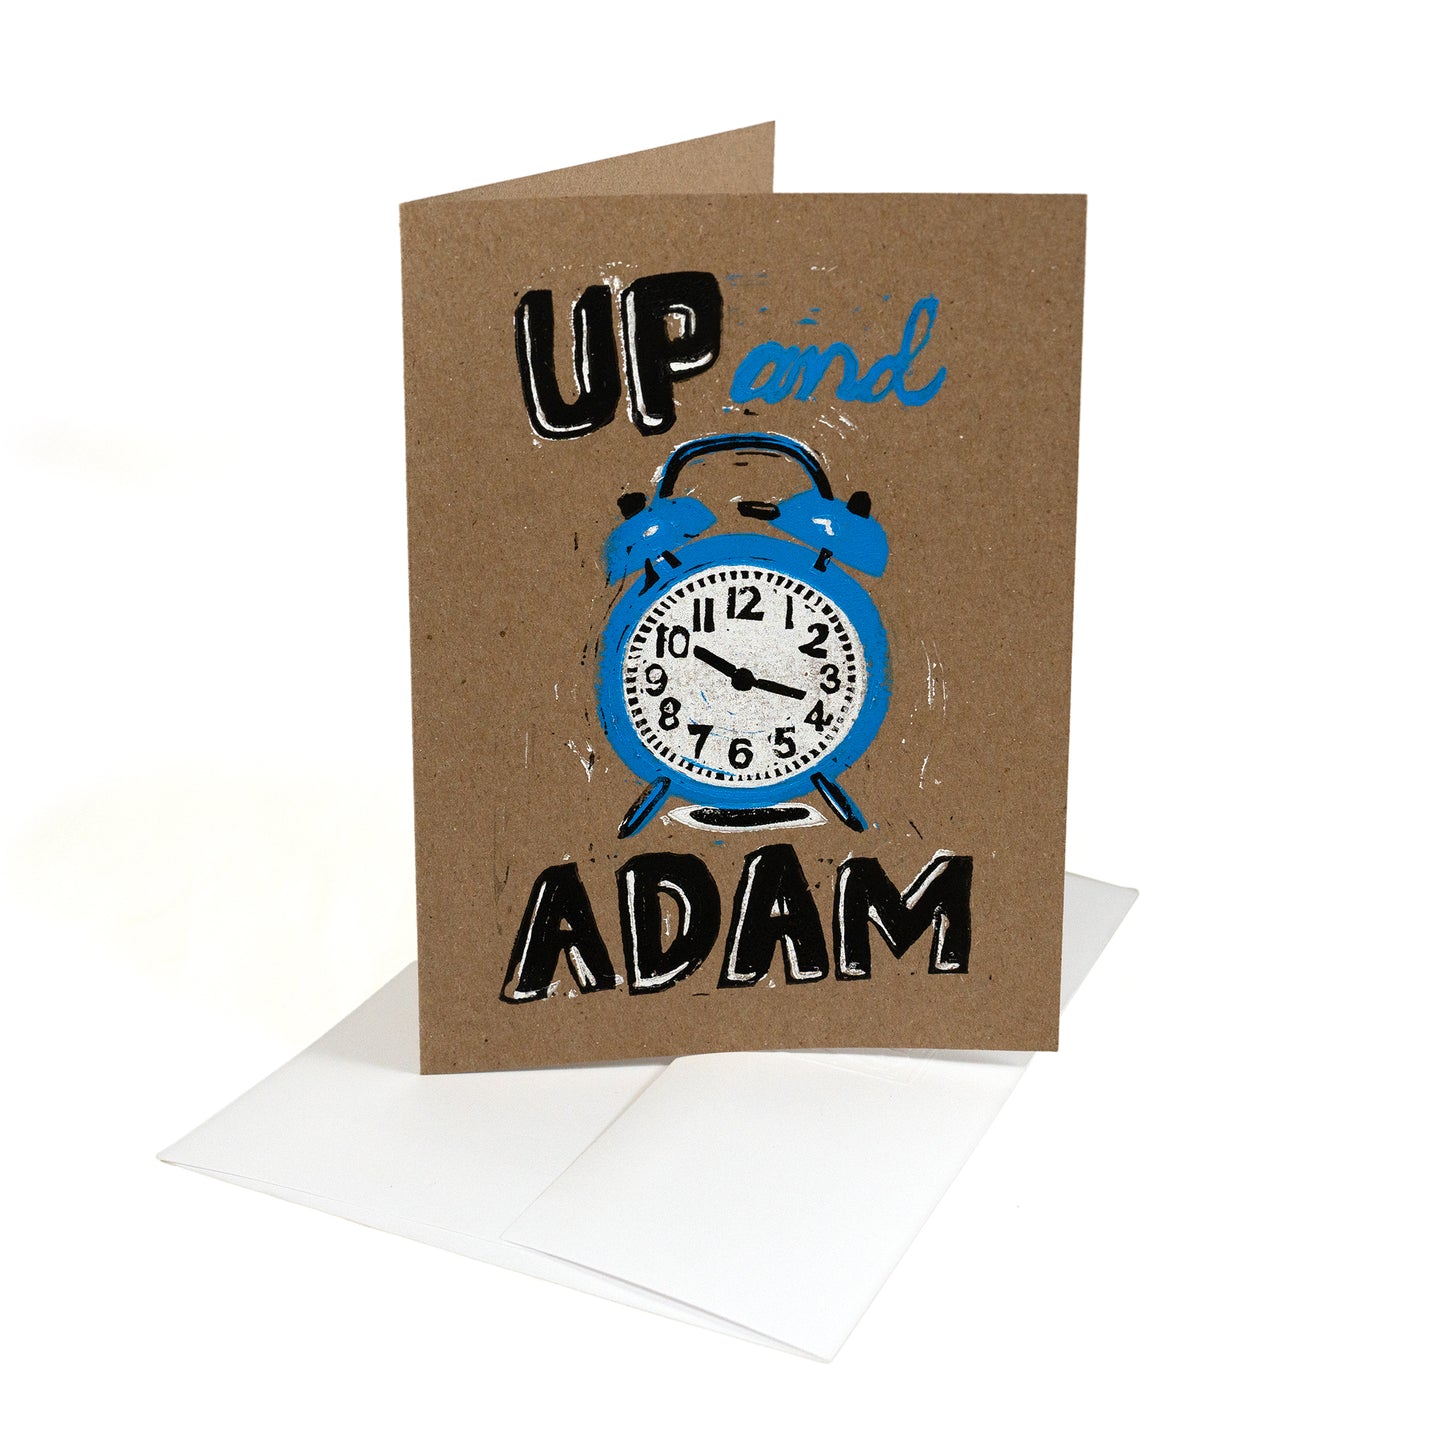 Up and Adam Card